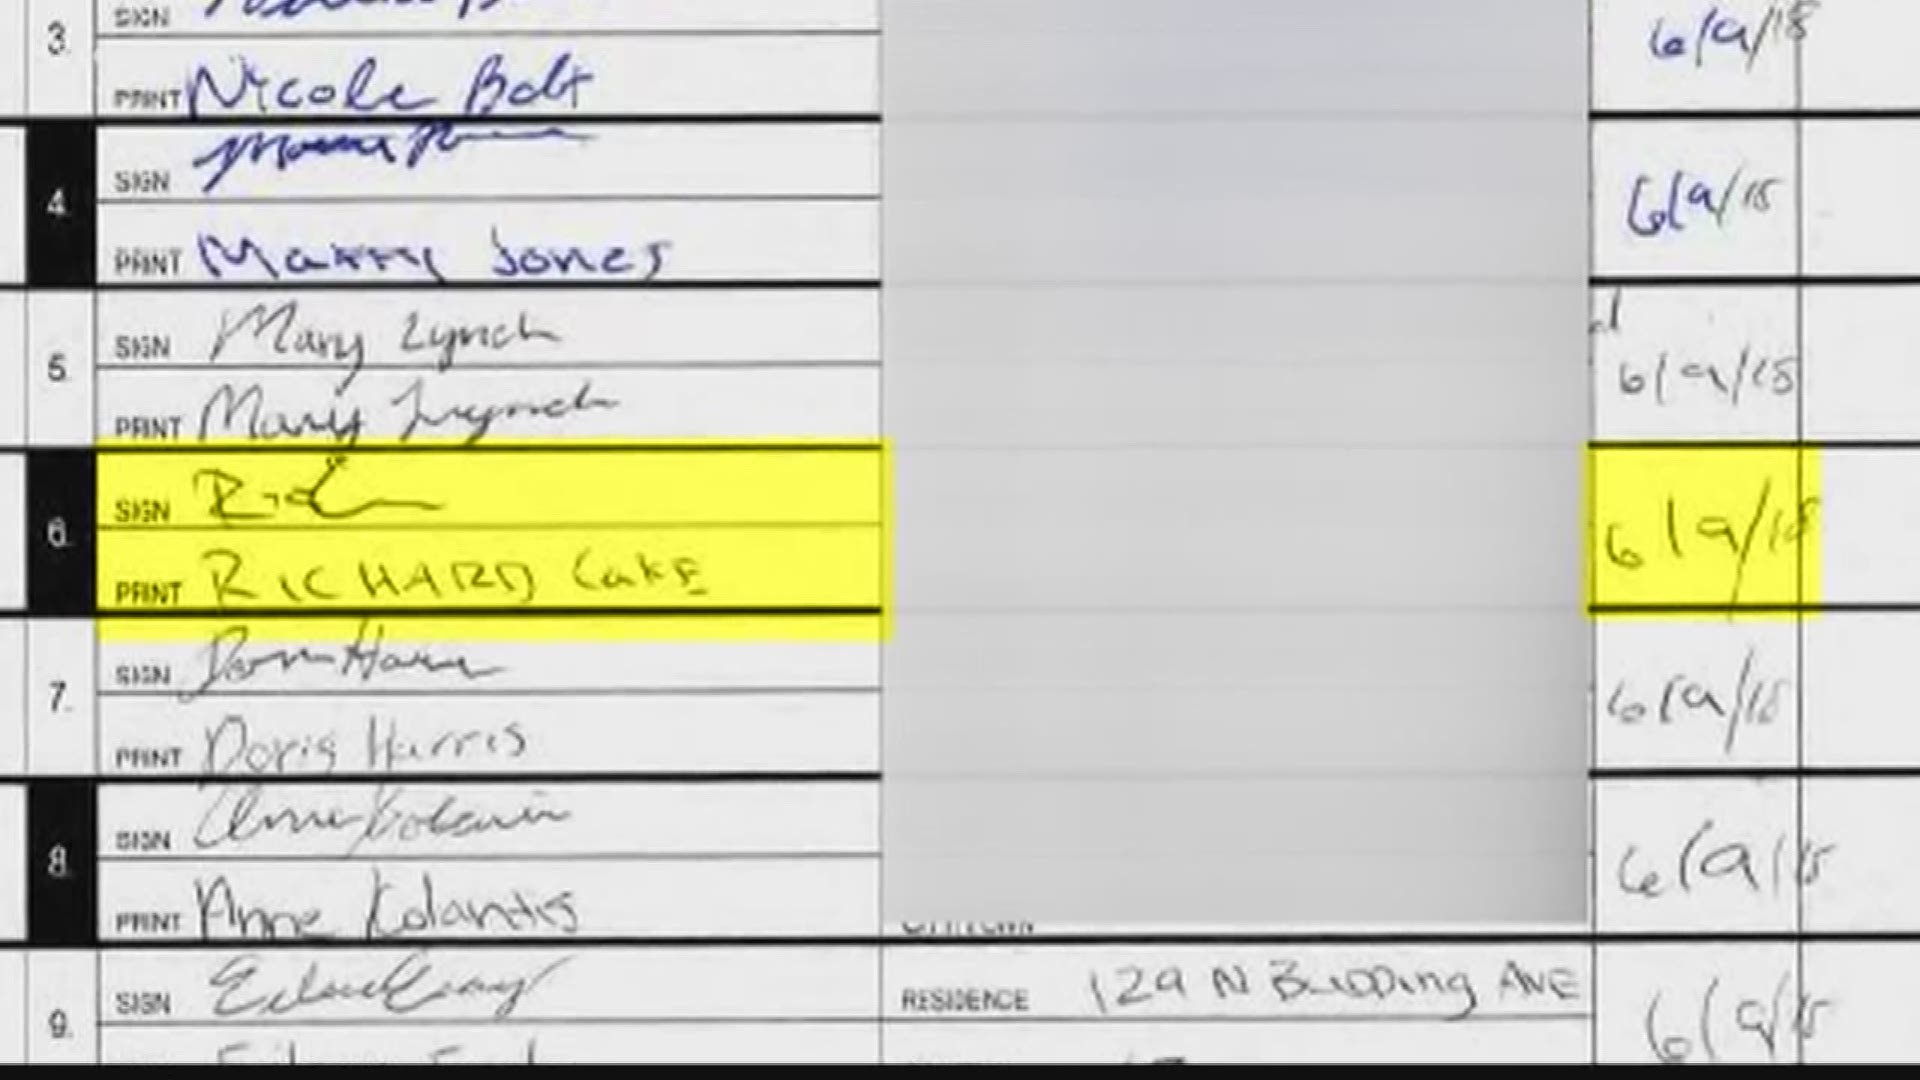 13News Now examined the legitimacy of signatures on the petitions for Brown. A staffer for Republican incumbent Rep. Scott Taylor gathered the signatures in question.